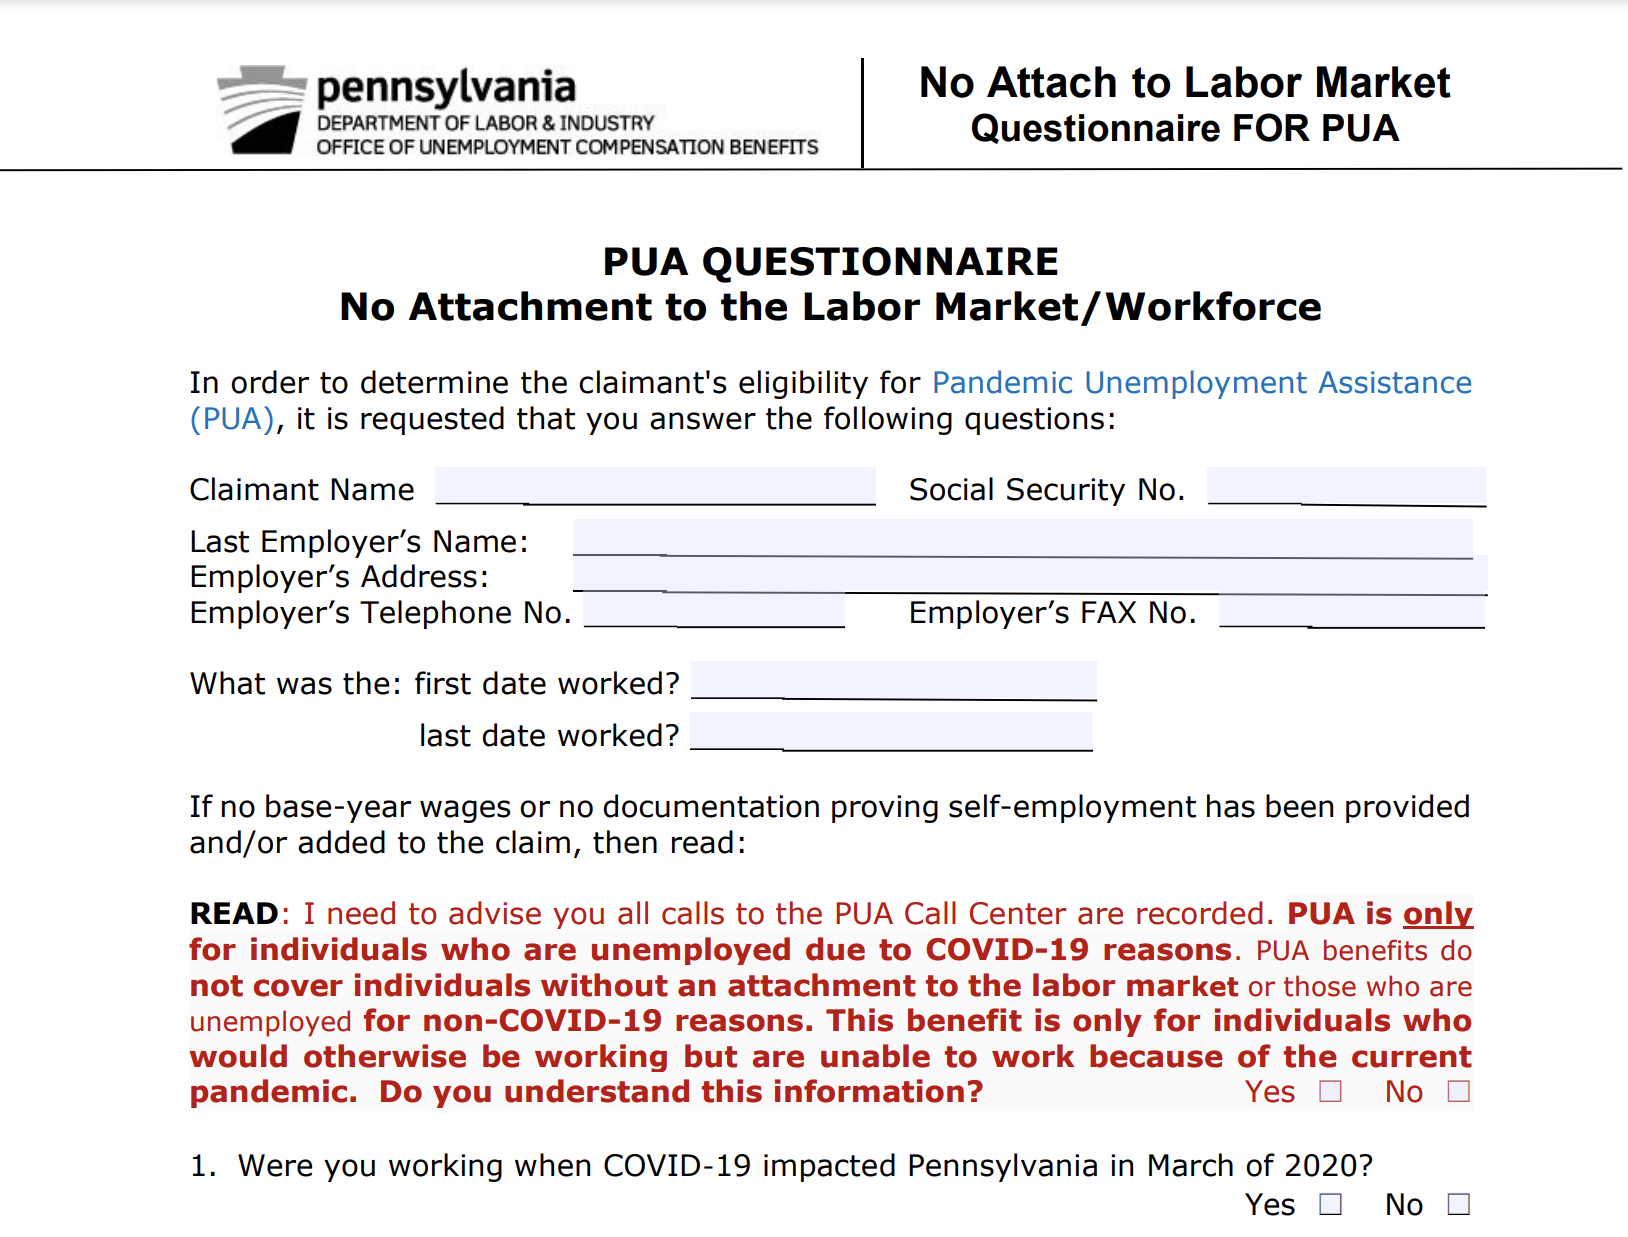 Do You Need to Prove that You Lost Work for PUA?